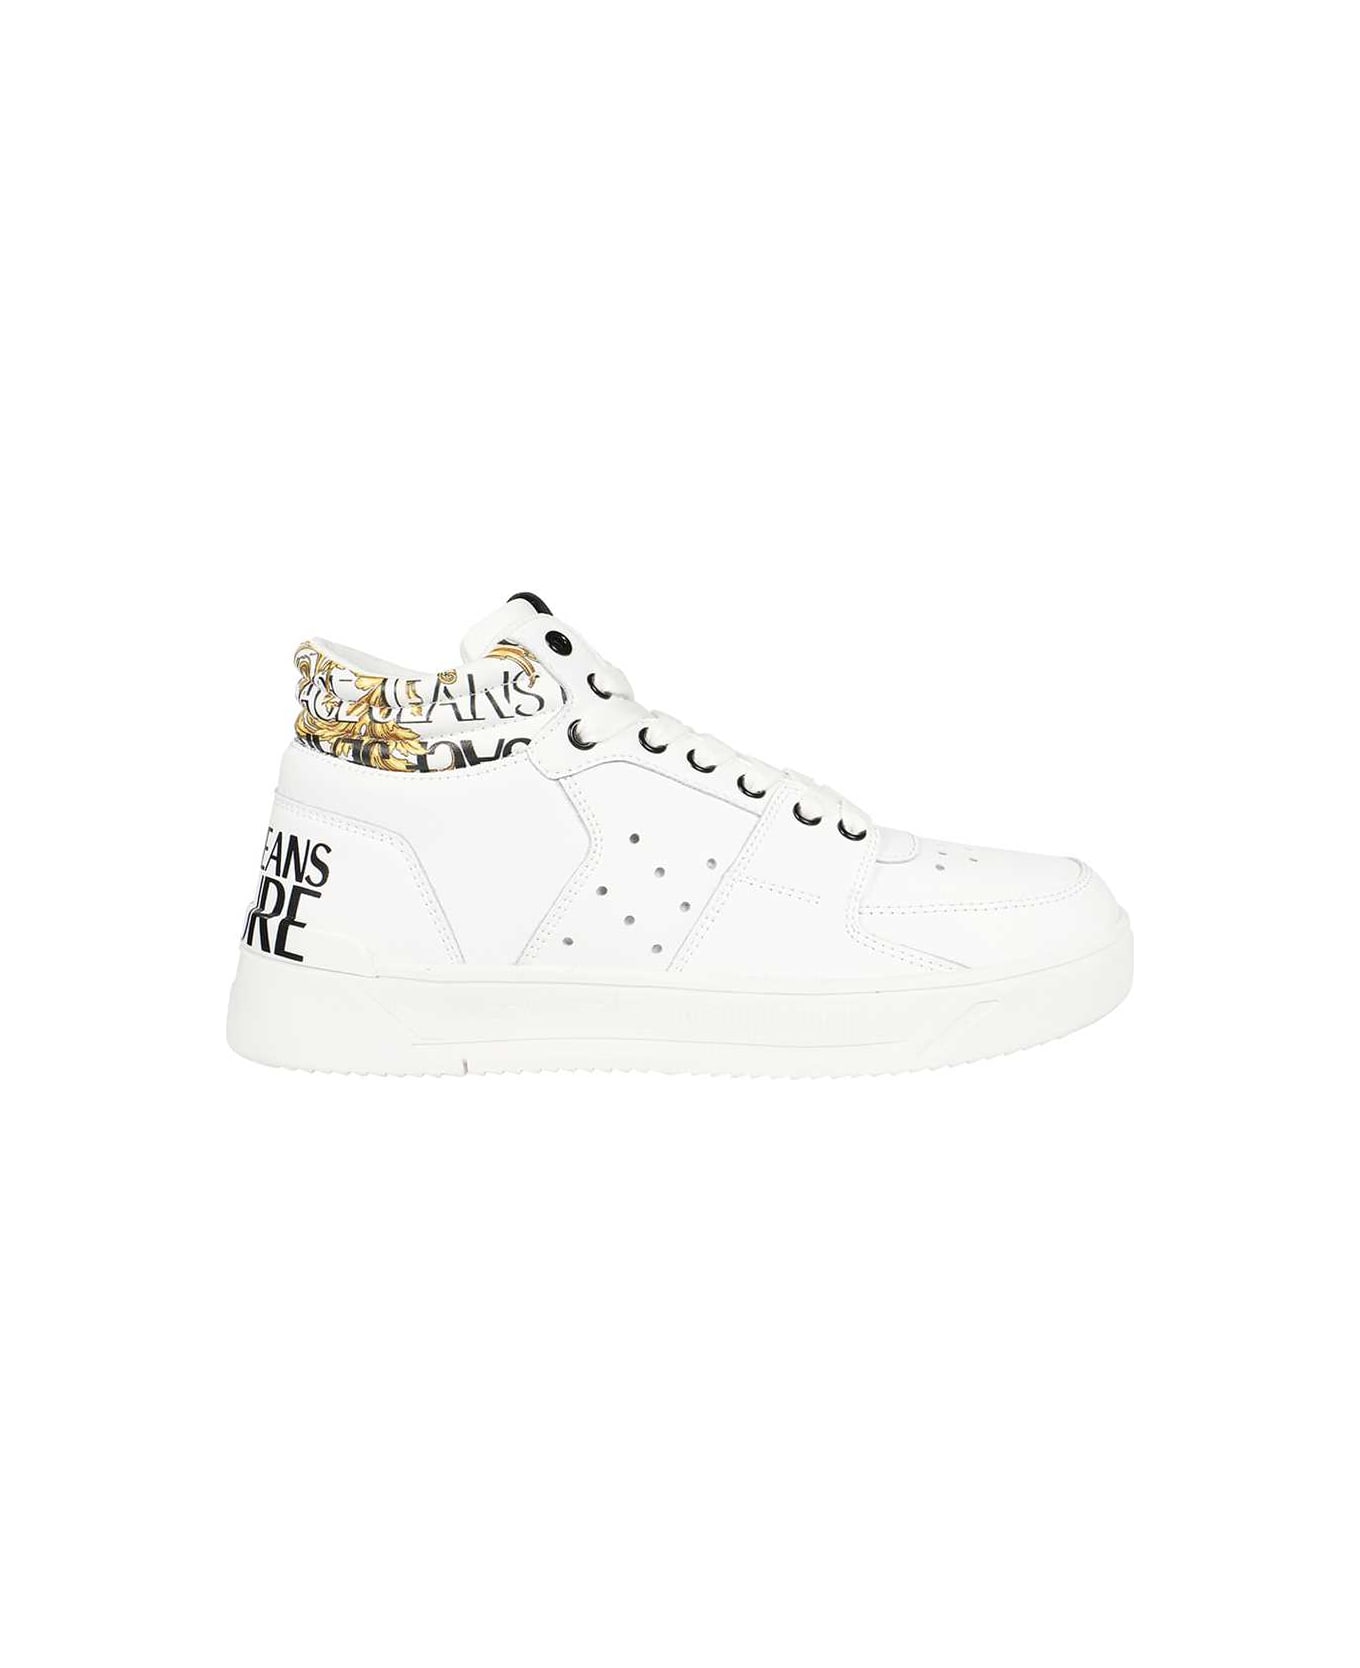 Versace Jeans Couture Logo Detail Leather Sneakers - White